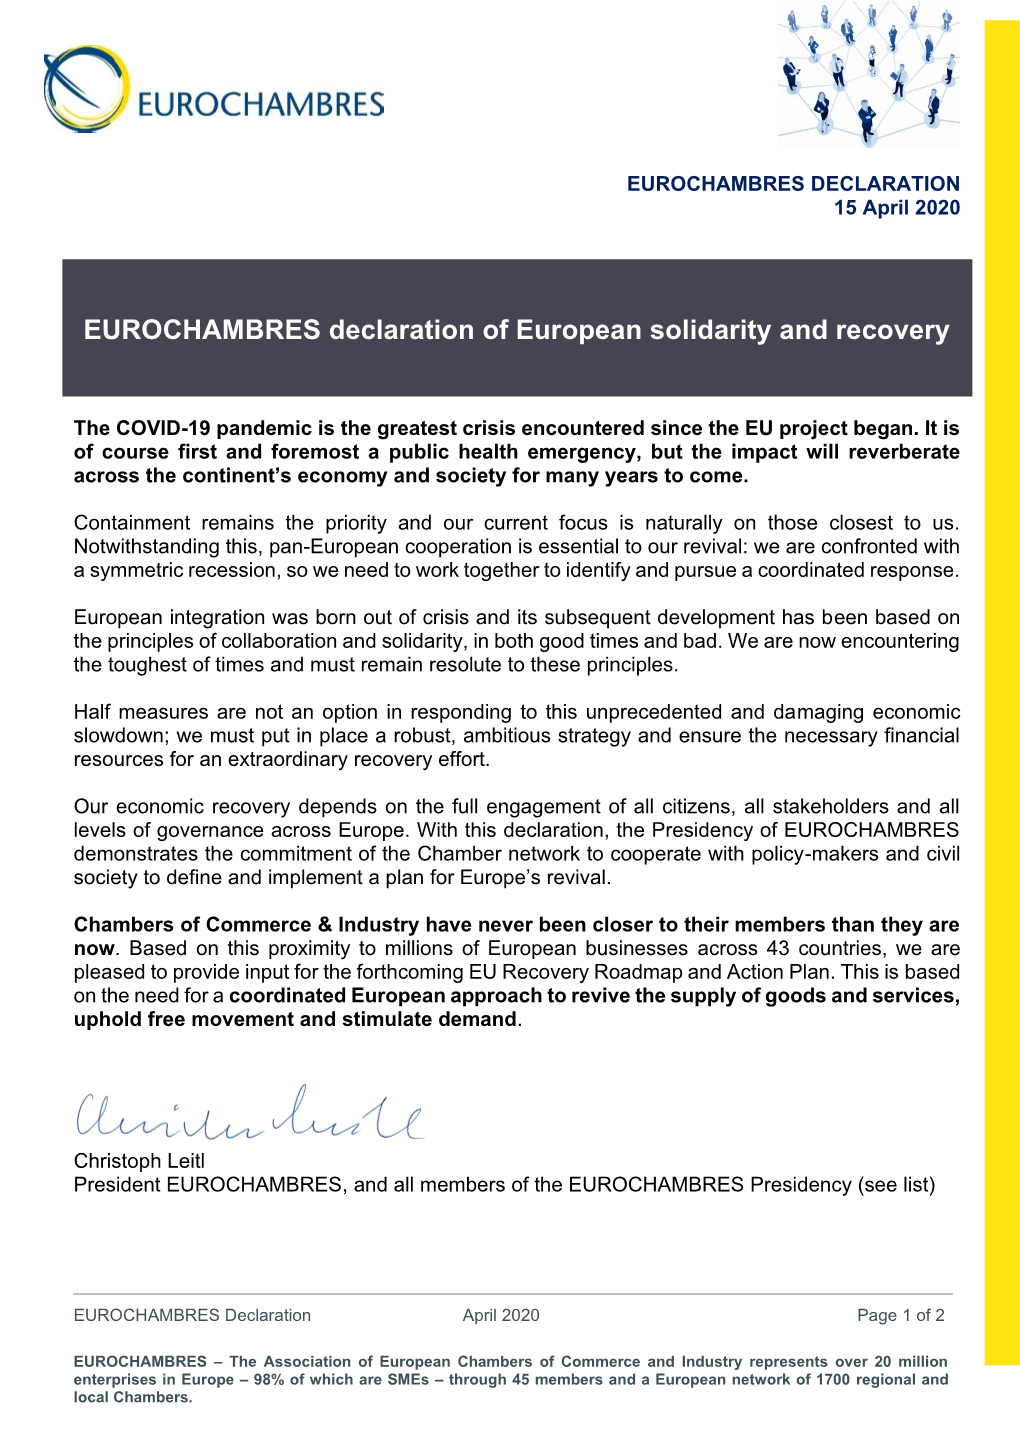 EUROCHAMBRES Declaration of European Solidarity and Recovery